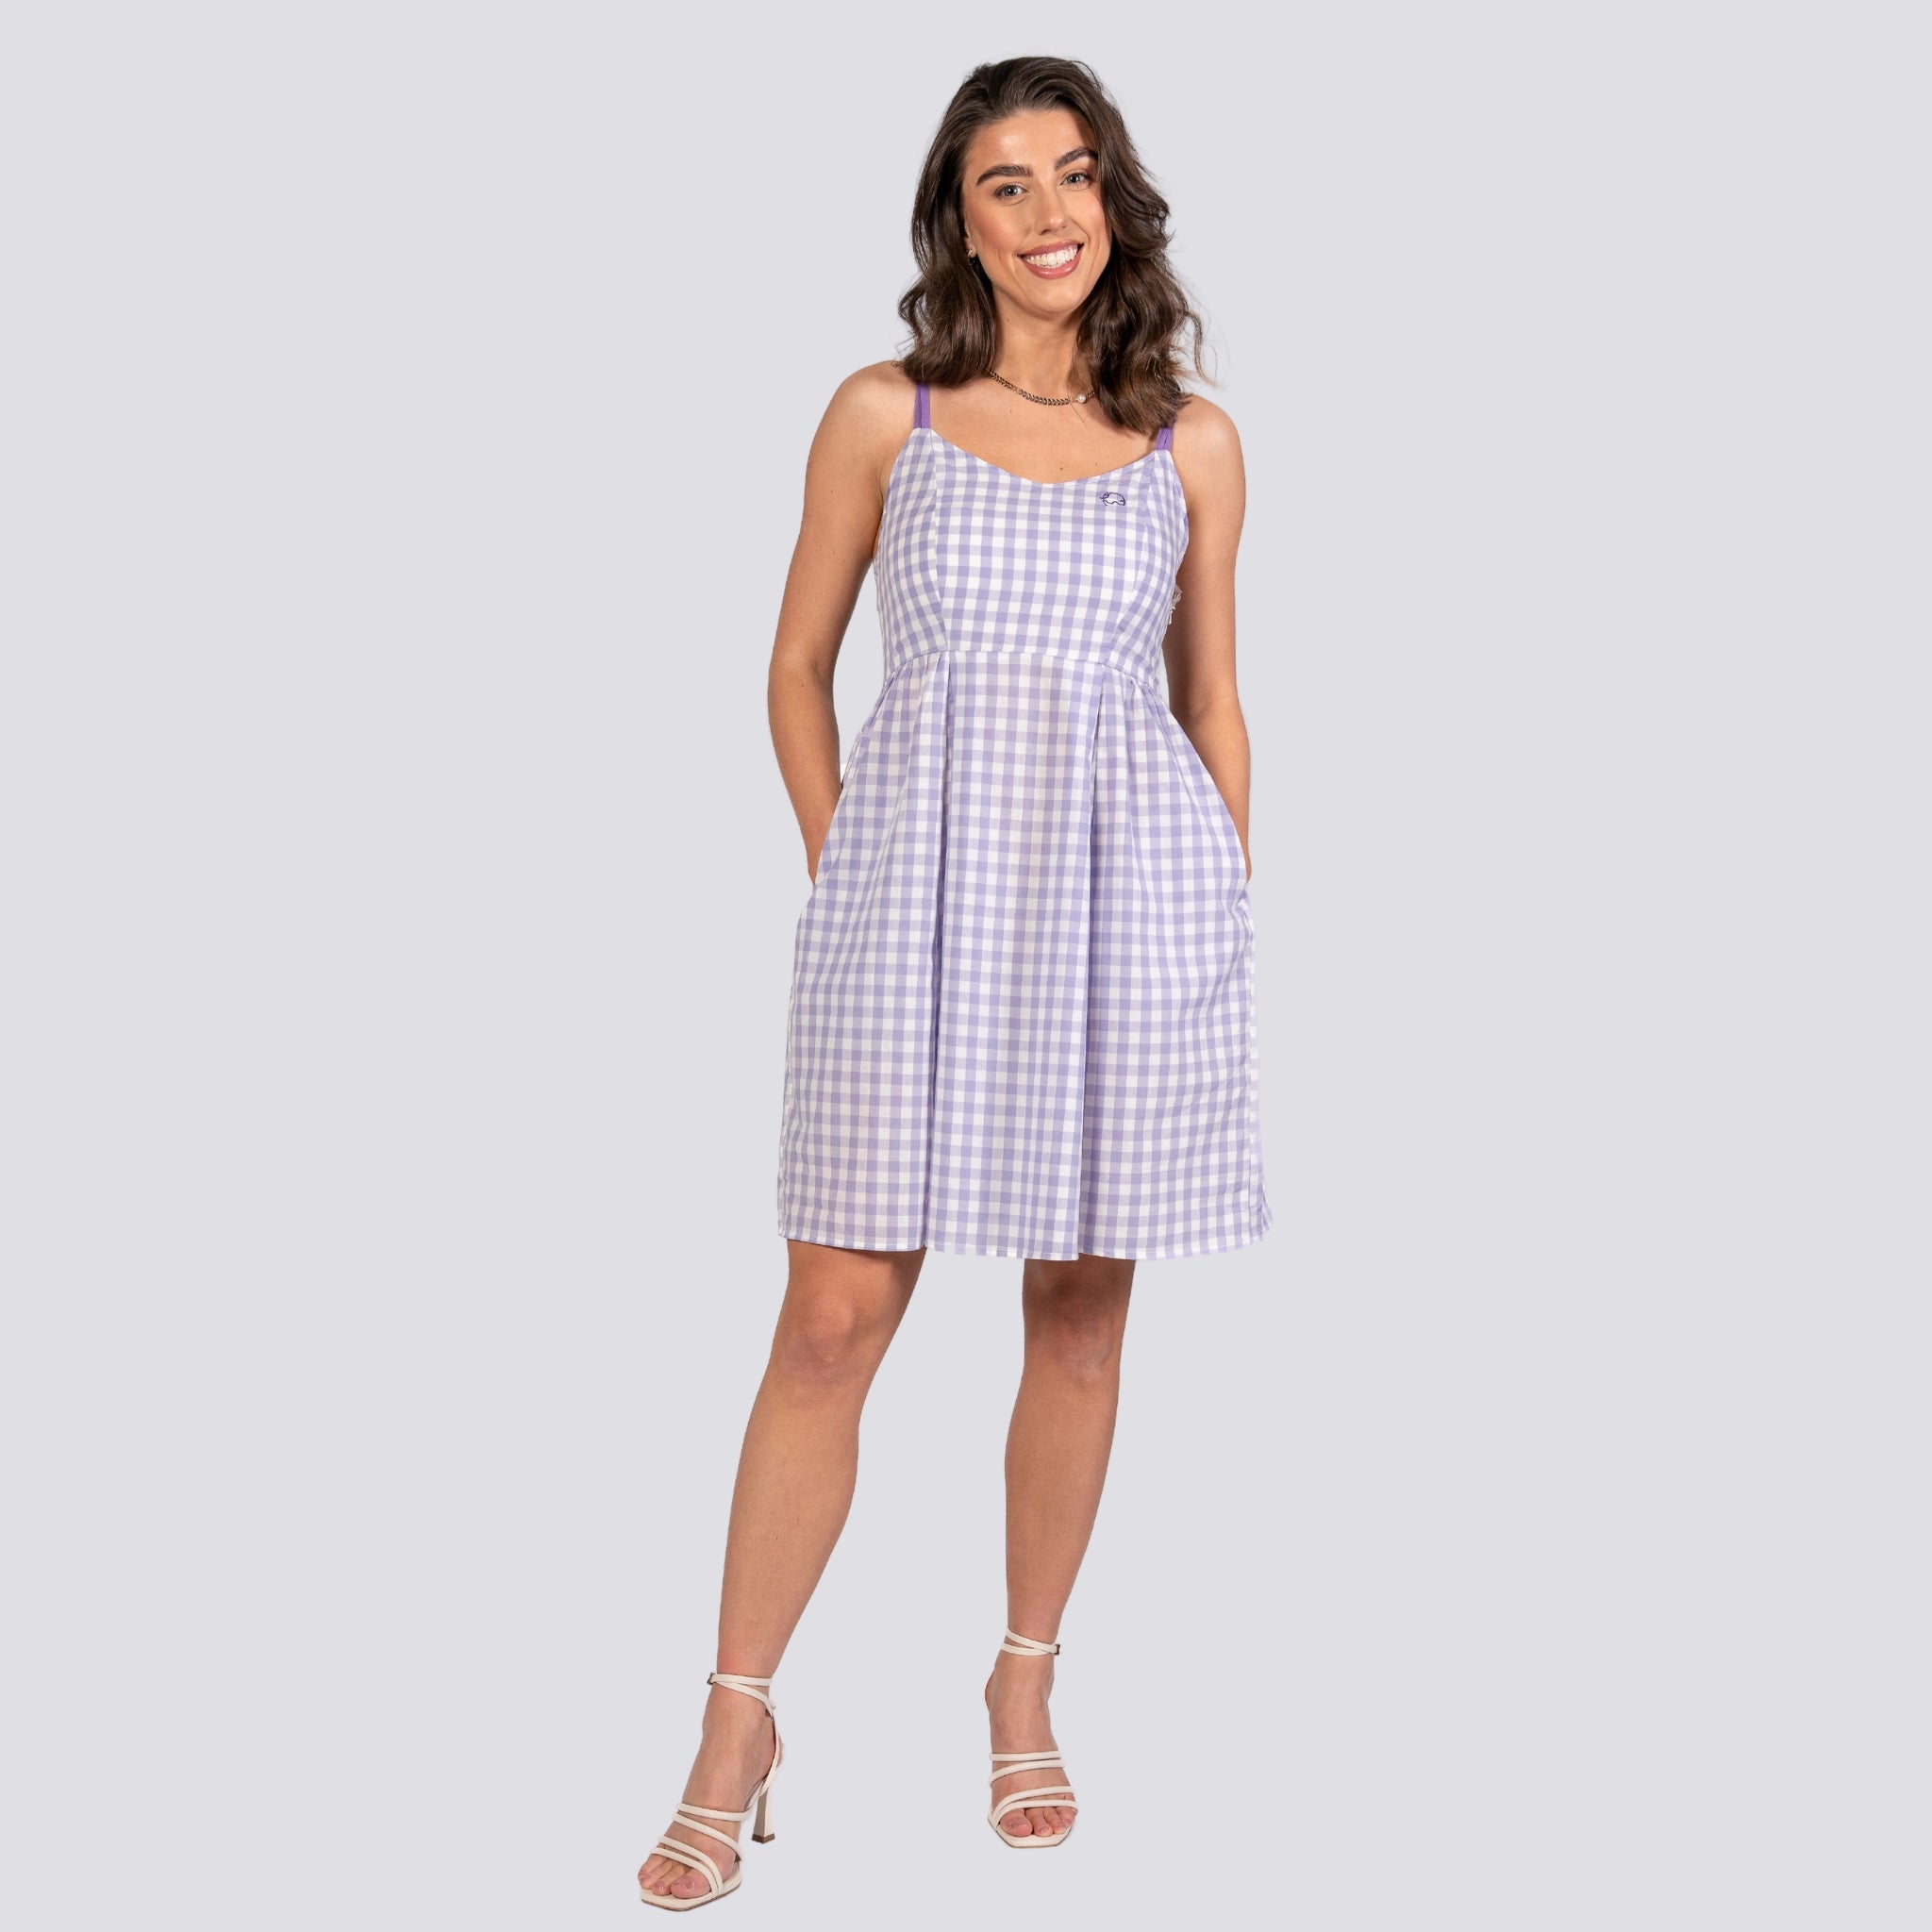 A woman in a Karee Lavender Plaid Cotton Mini Dress and white heels smiles while posing against a plain background.